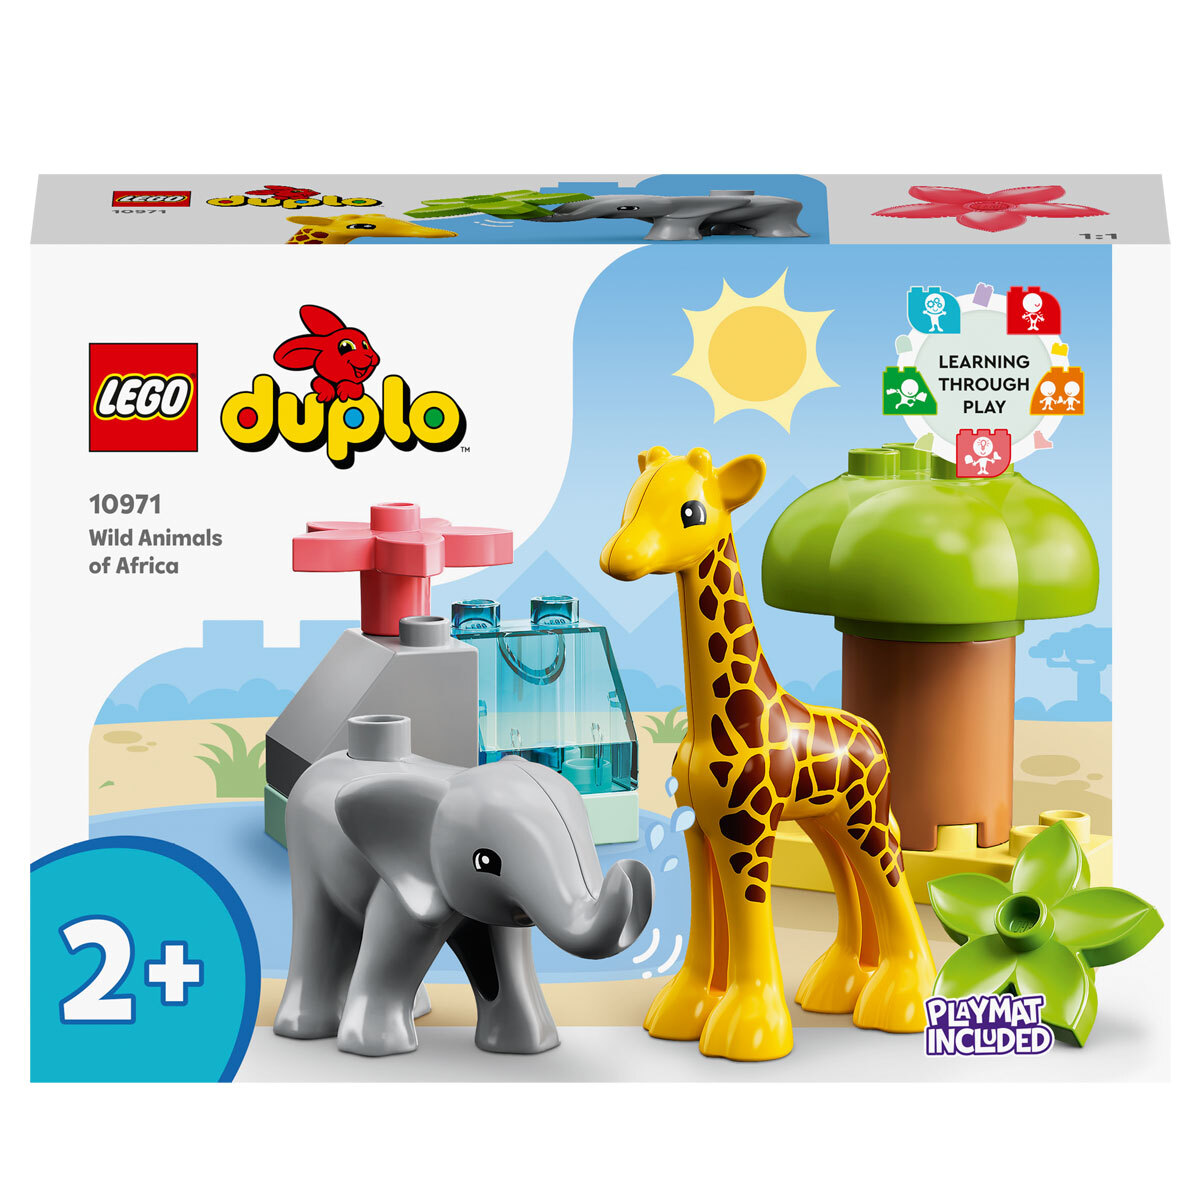 LEGO DUPLO Wild Animals of Africa 10971 | Early Learning Centre